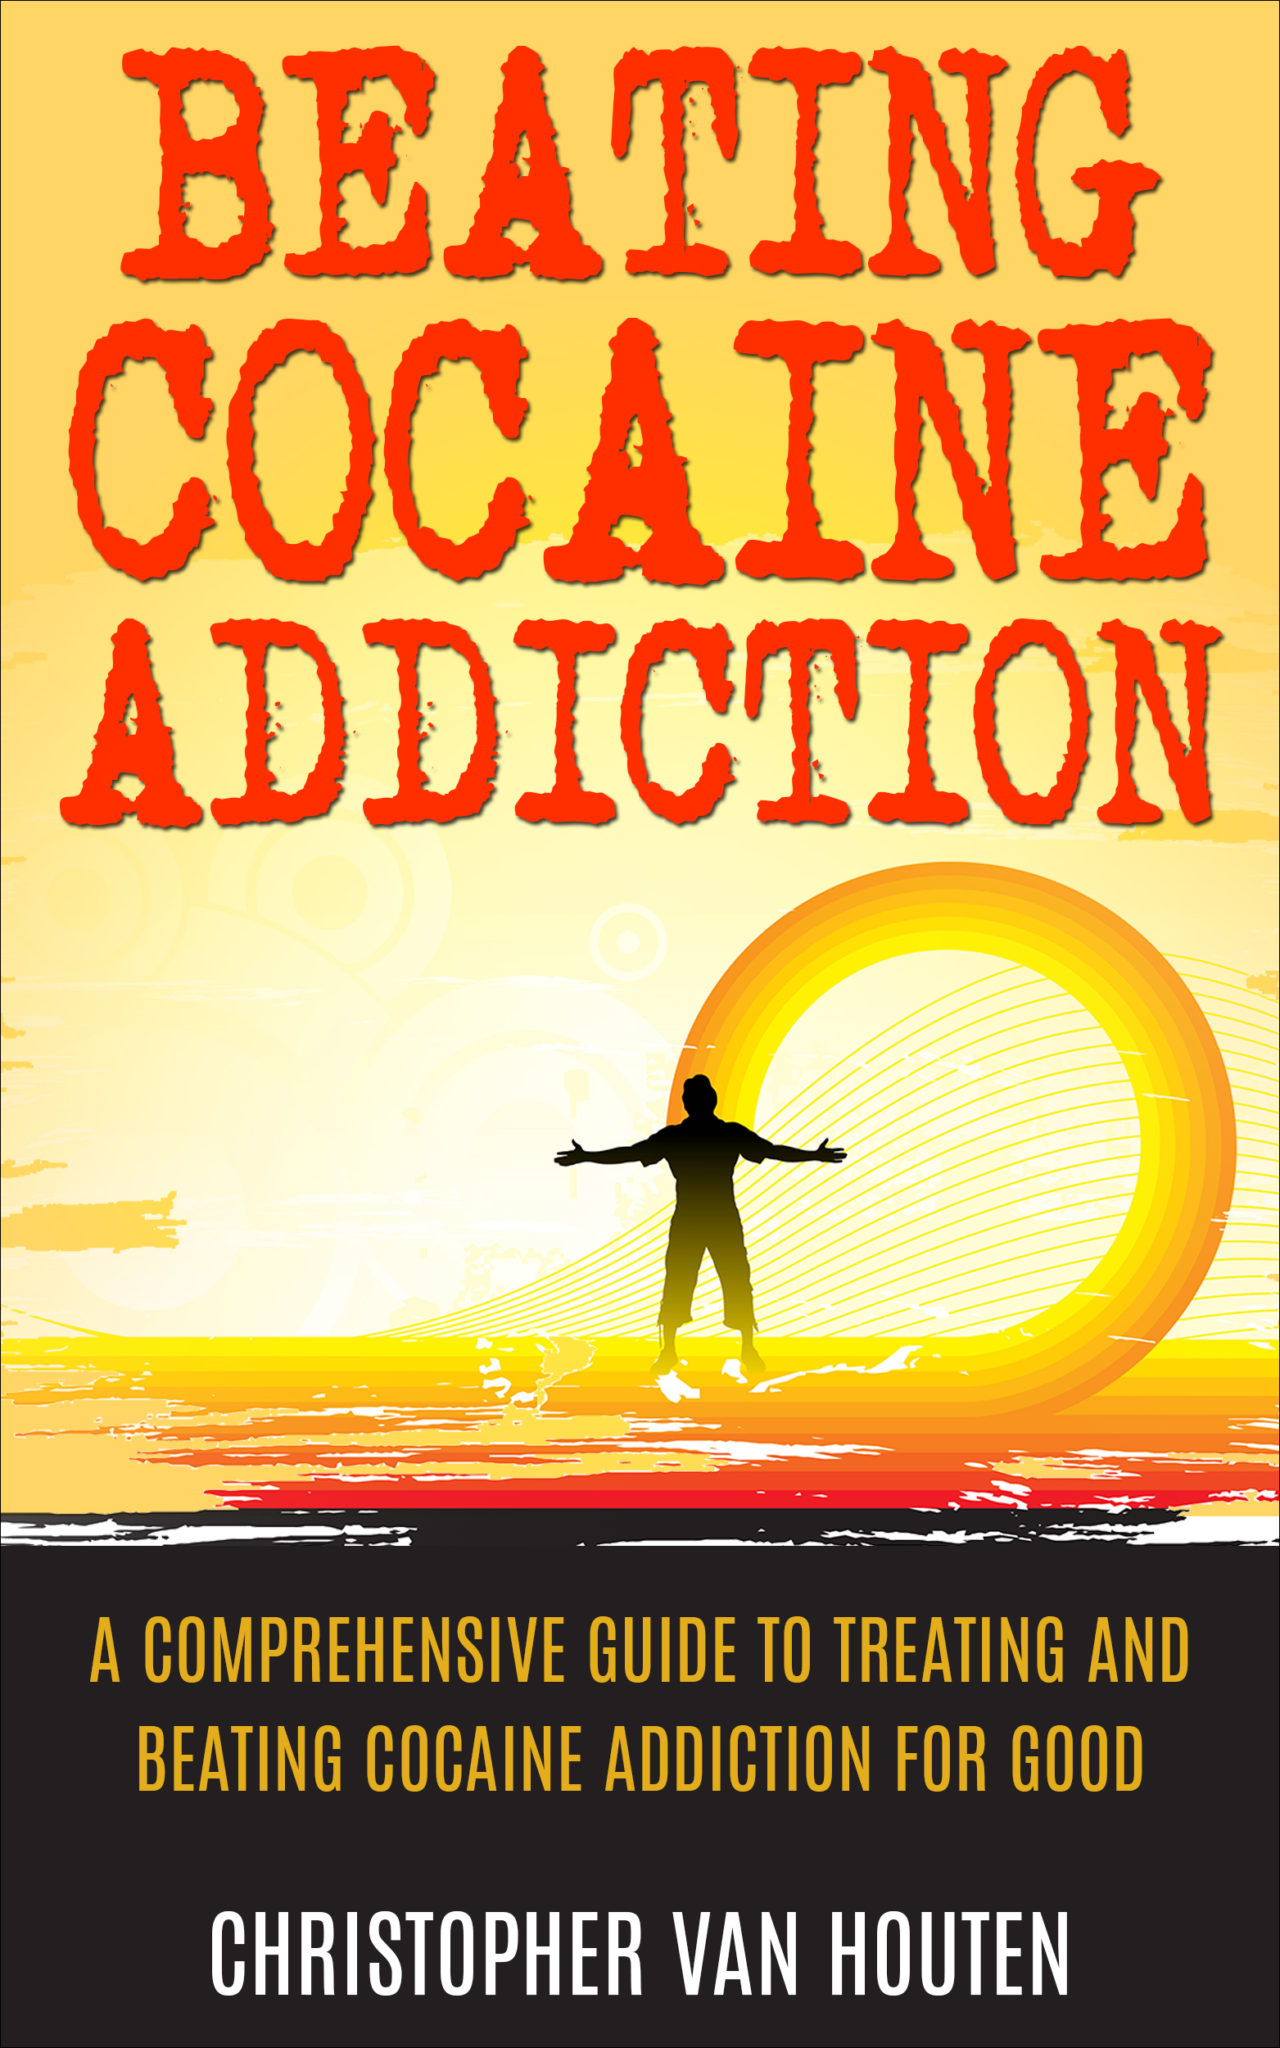 FREE: Beating Cocaine Addiction: A Comprehensive Guide To Treating And Beating Cocaine Addiction For Good by Christopher Van Houten